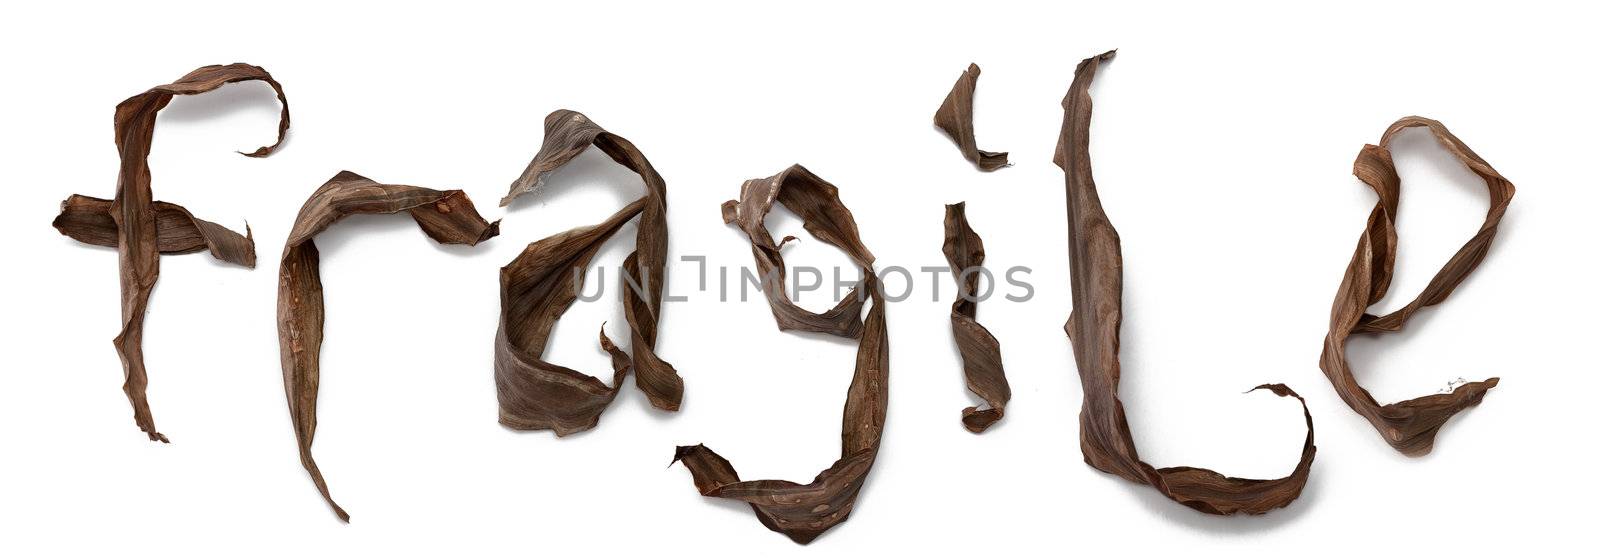 Letter-shaped dry leaves assembled in word fragile isolated on white background